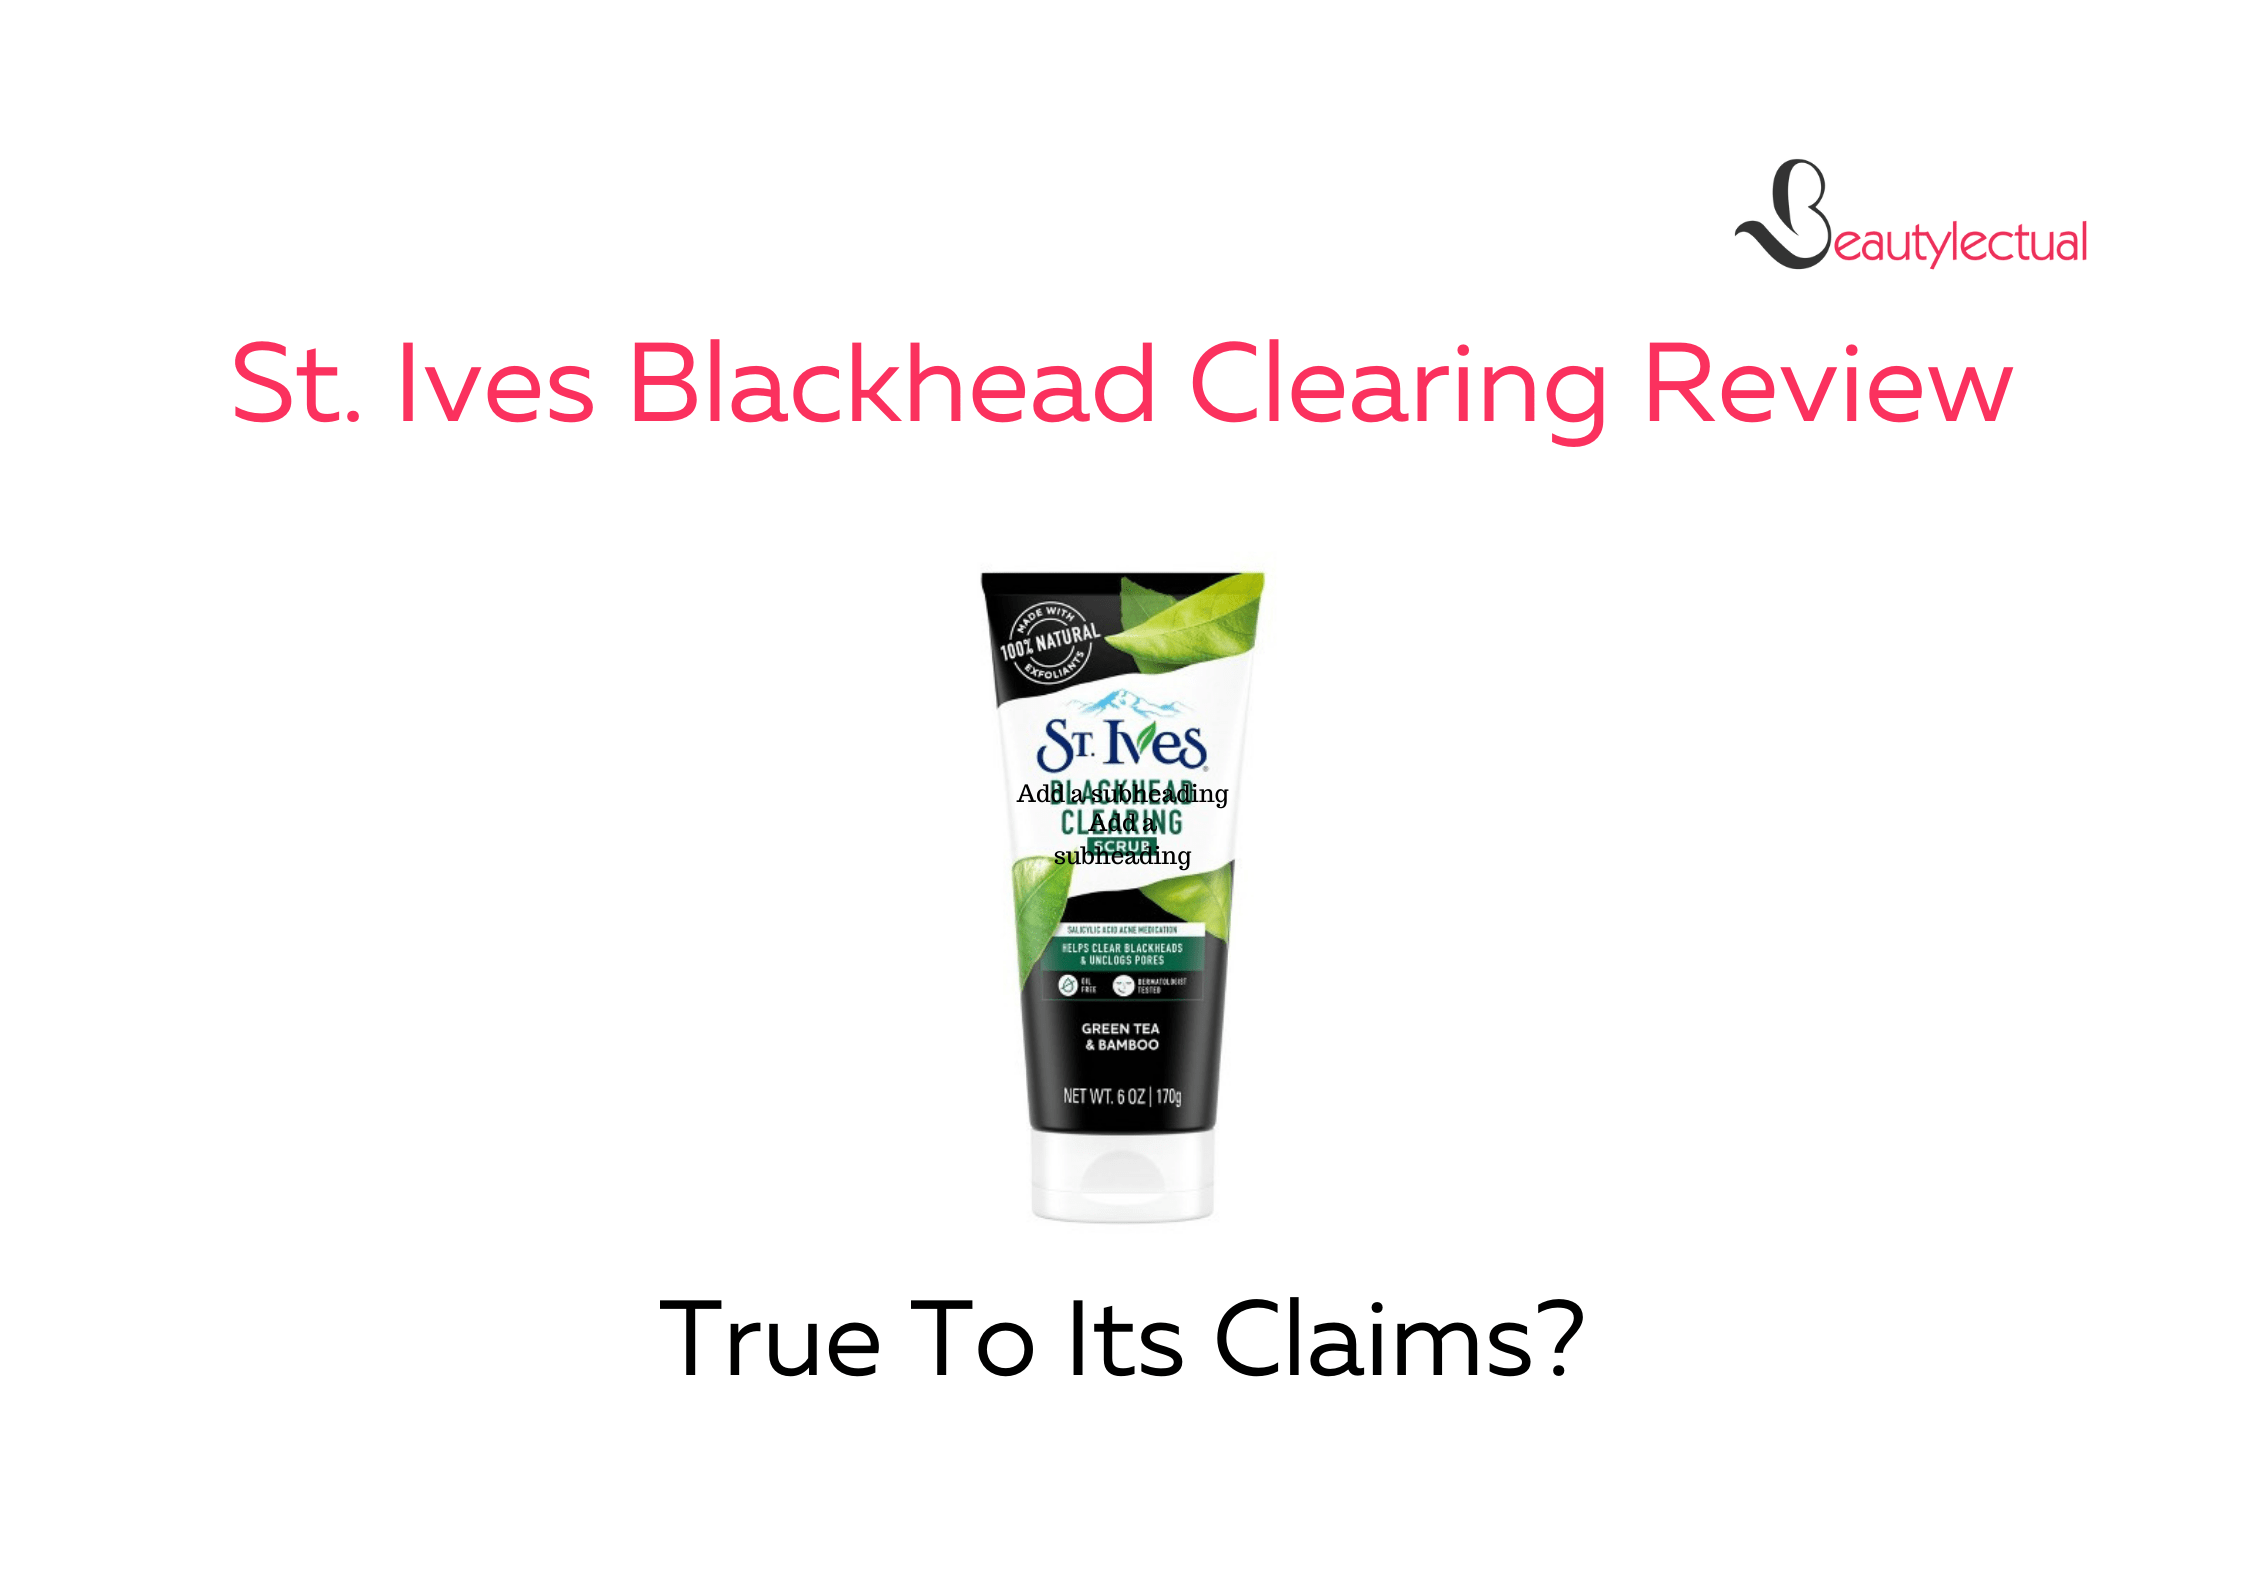 St. Ives Blackhead Clearing Reviews